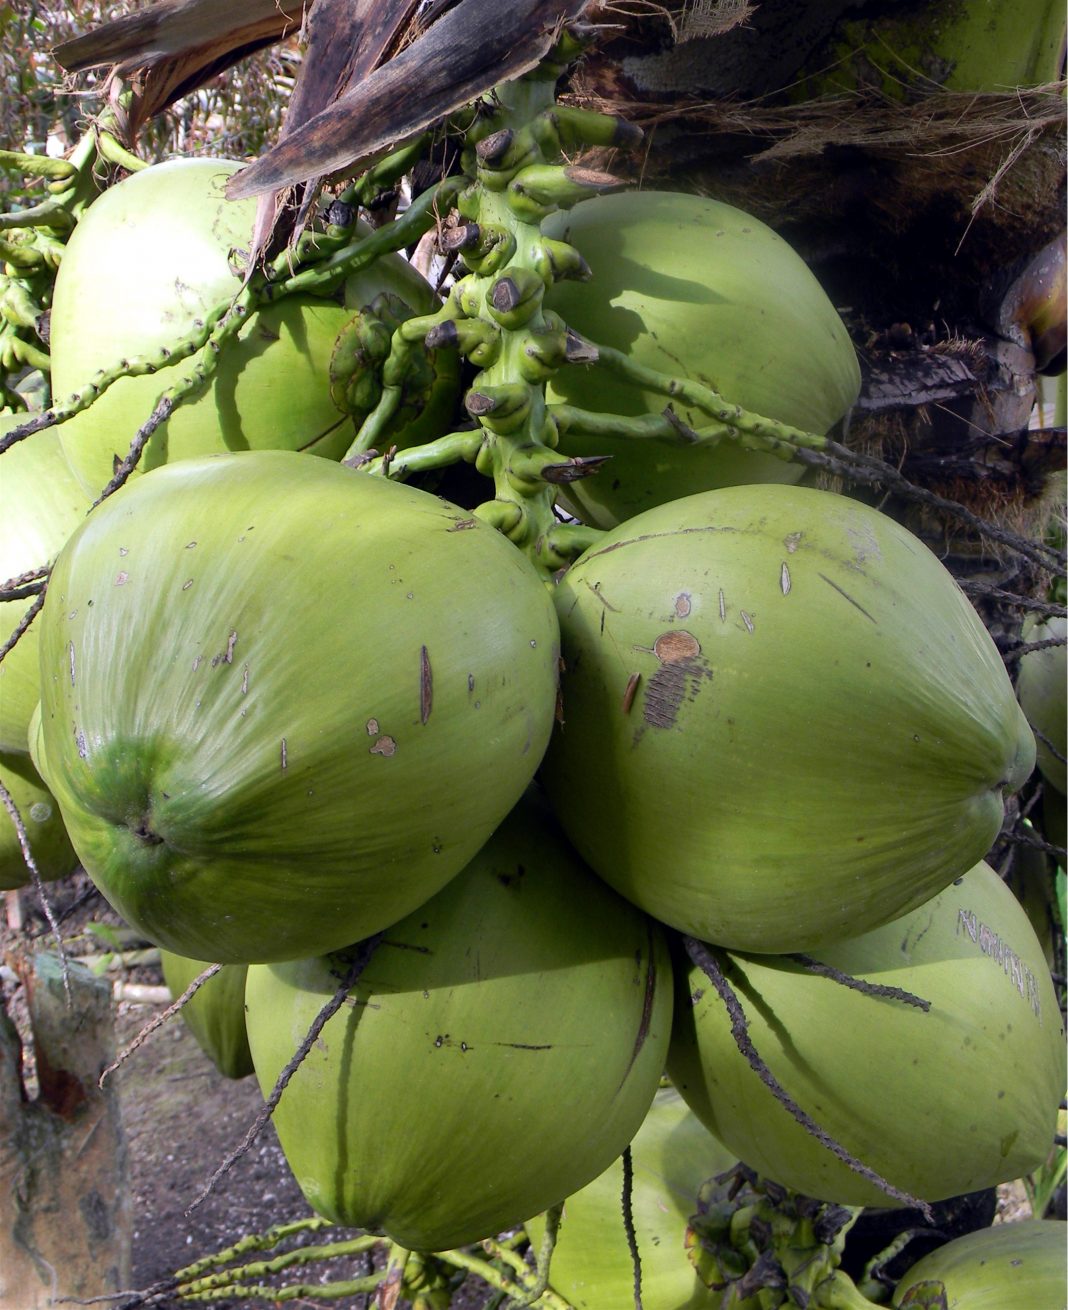 Coconut Major Export Crop Of Filipino Farmers First Of Four Parts Edge Davao